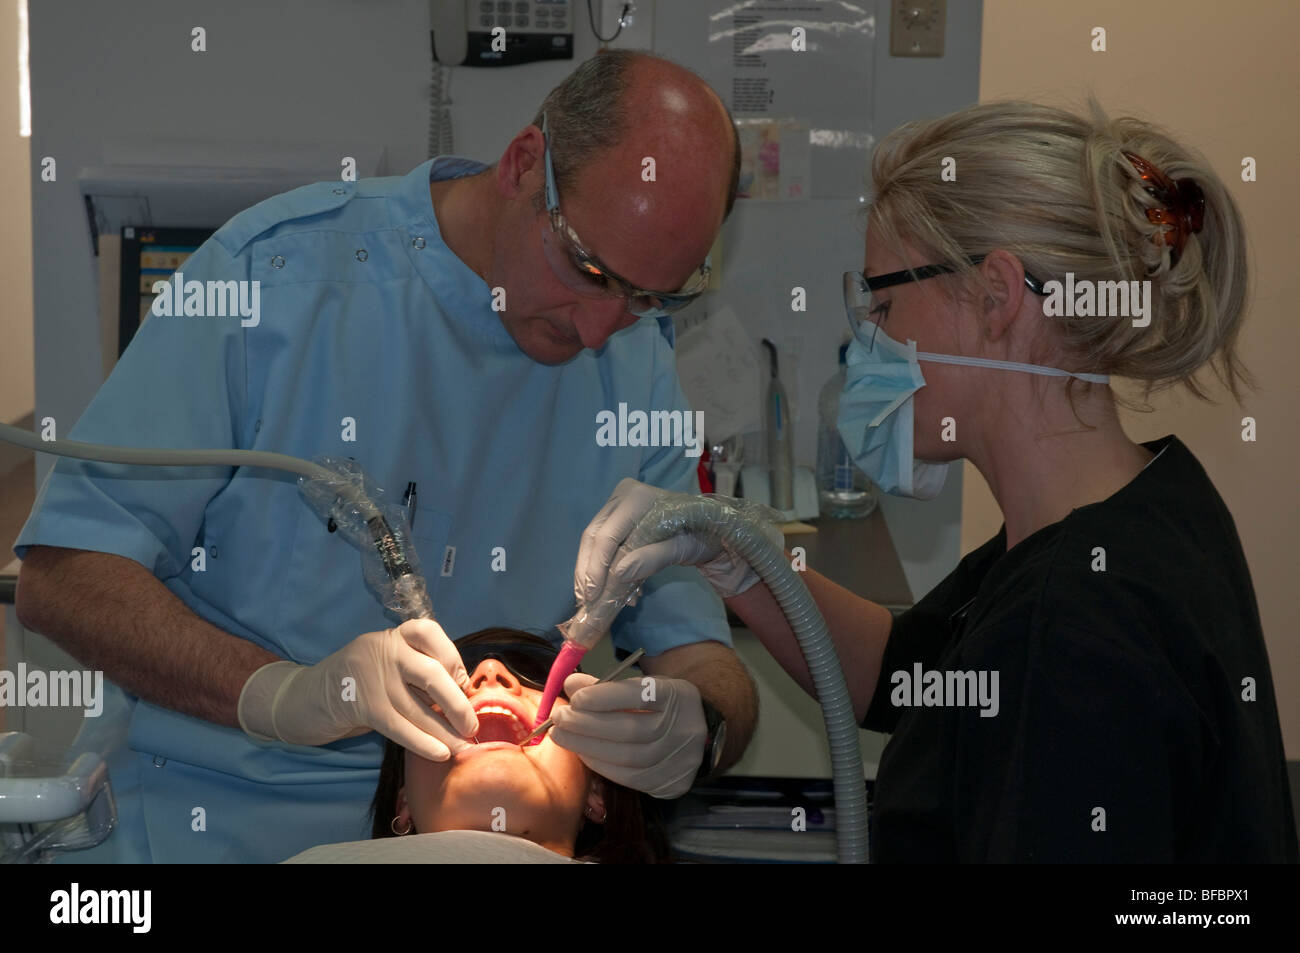 Dentist and dental assistant give a patient in a modern dental surgery a regular checkup Stock Photo